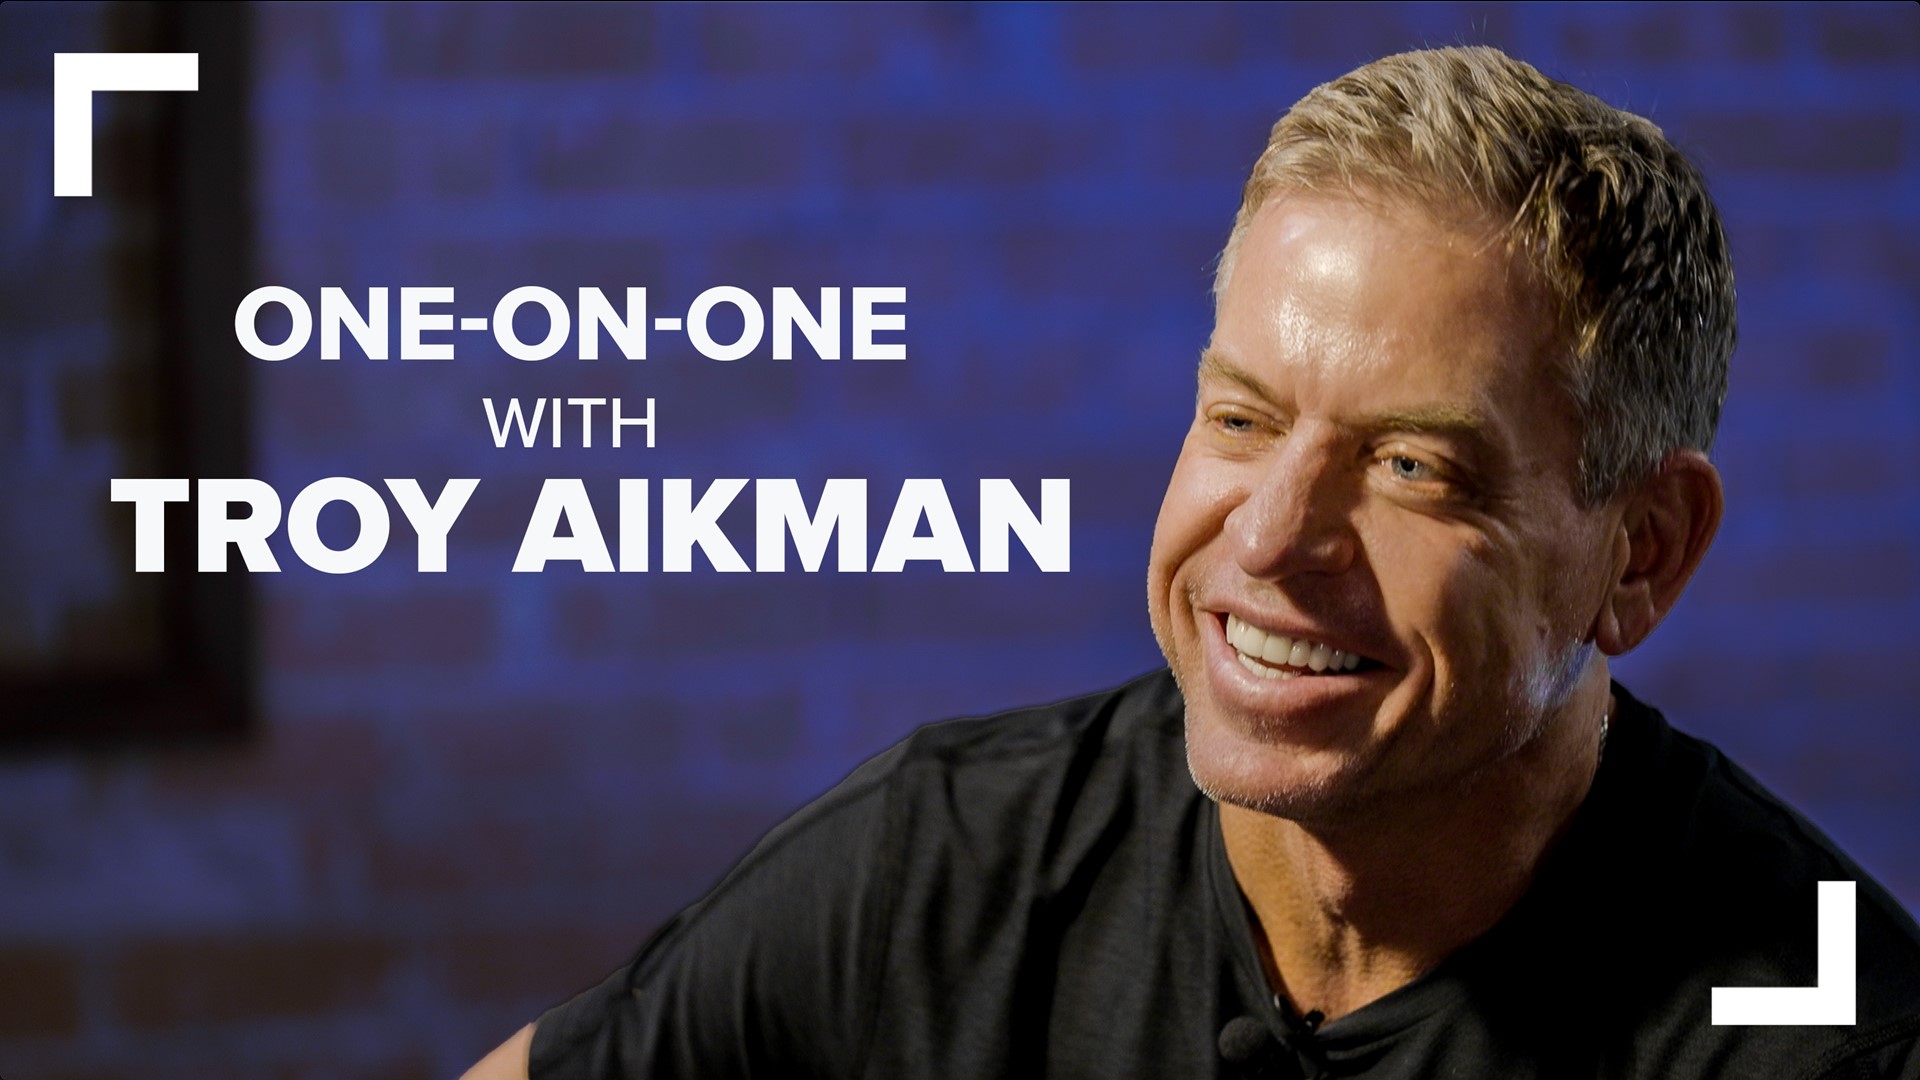 Dallas Cowboys legend Troy Aikman joined WFAA's Joe Trahan for an exclusive one-on-one interview, where they discussed the Cowboys, Monday Night Football, and more.